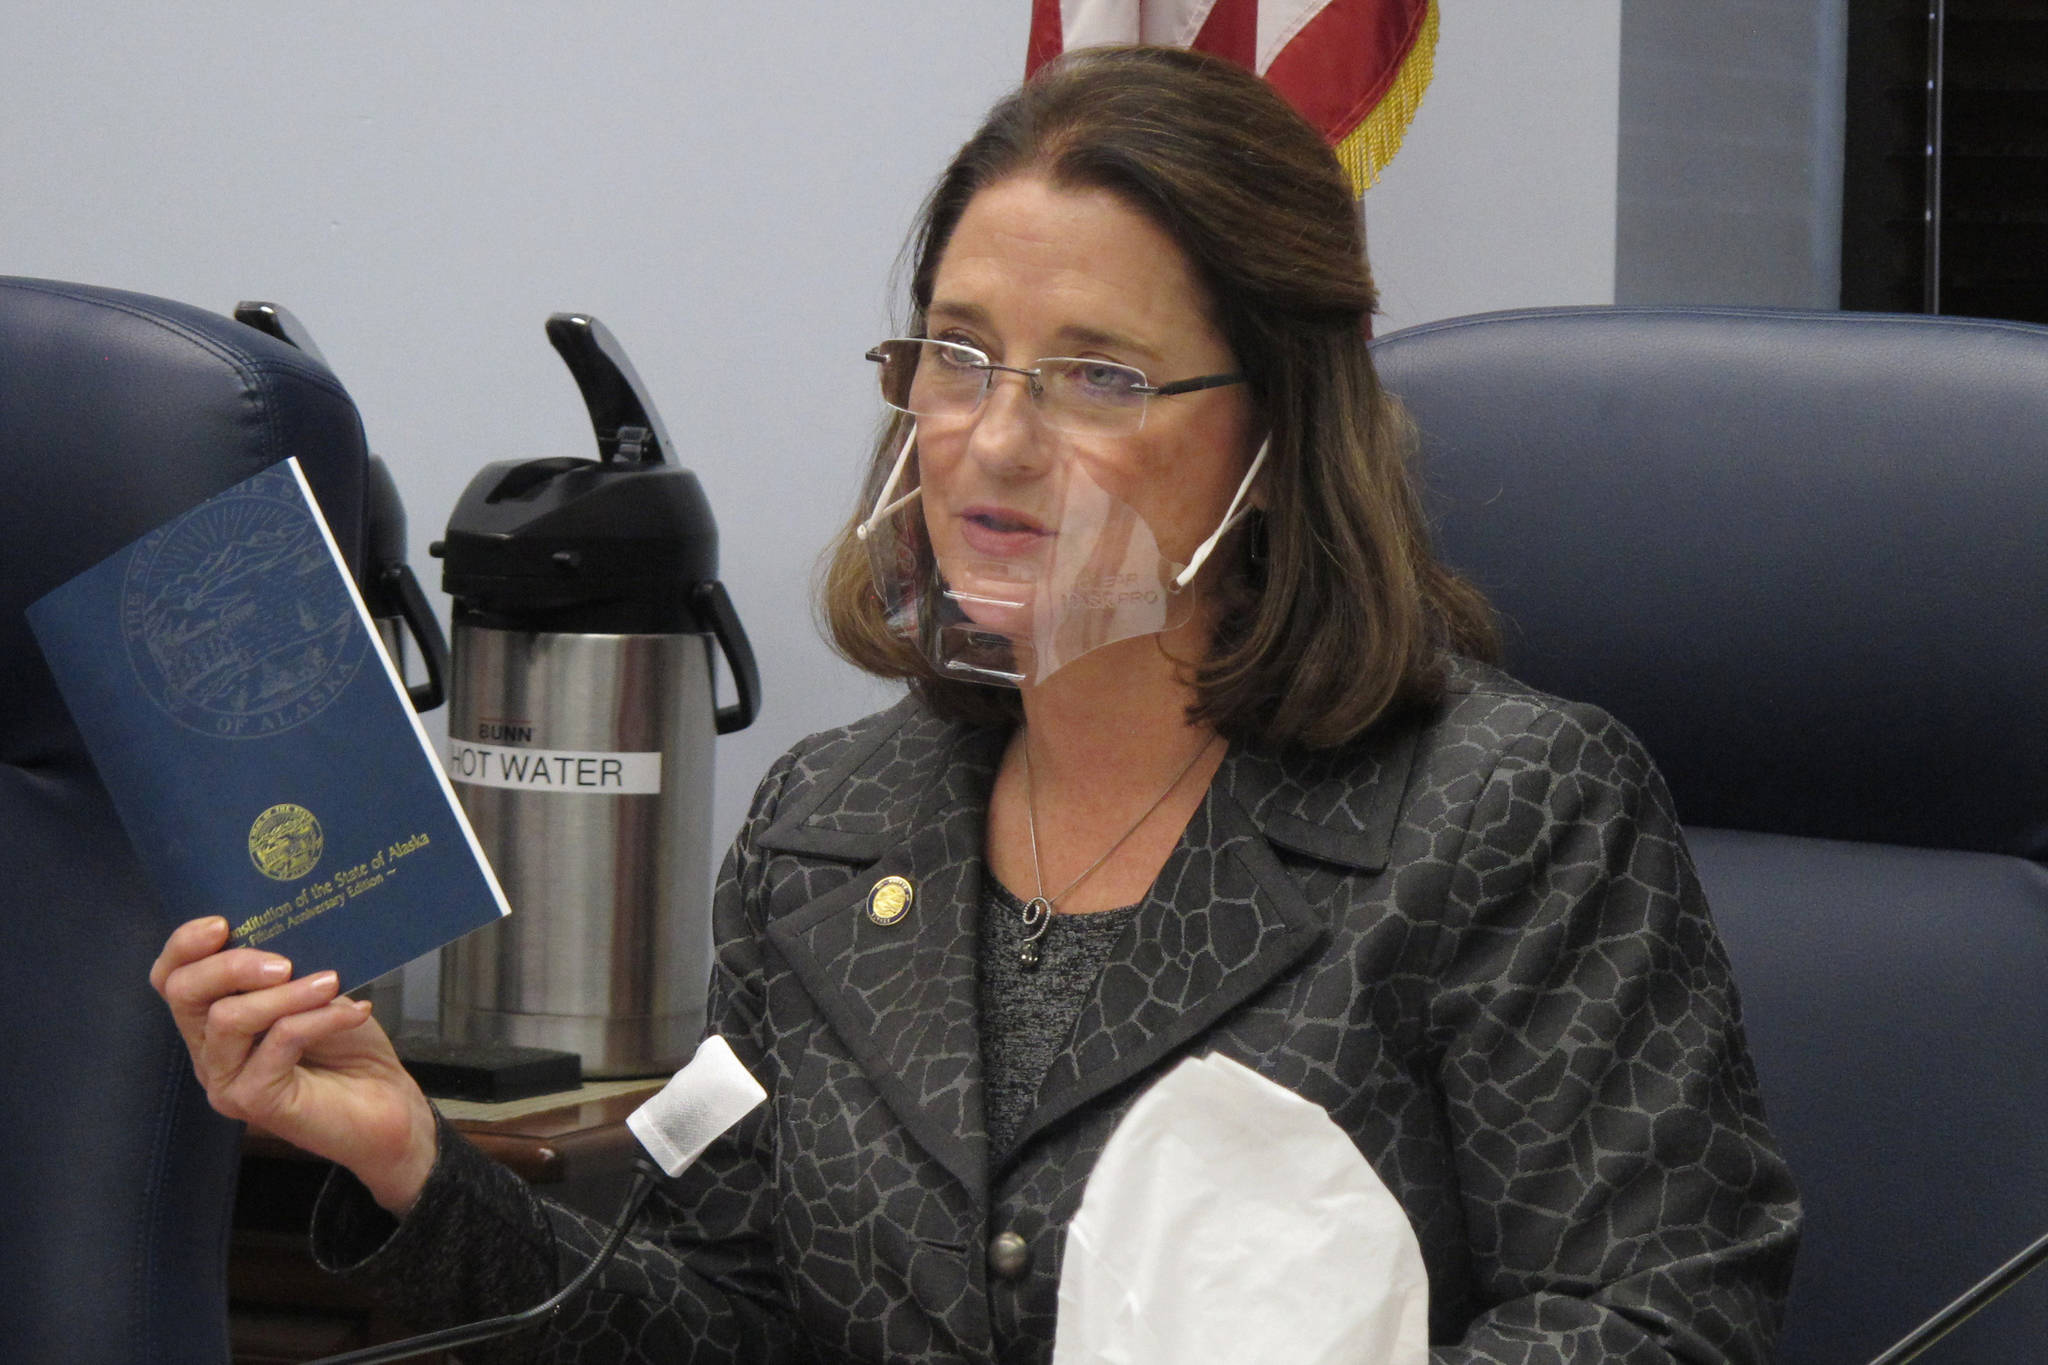 In this Jan. 27, 2021 file photo, Alaska state Sen. Lora Reinbold, an Eagle River Republican, holds a copy of the Alaska Constitution during a committee hearing in Juneau, Alaska. Alaska Airlines has banned the Alaska state senator for refusing to follow mask requirements. Last week Reinbold was recorded in Juneau International Airport arguing with Alaska Airlines staff about mask policies. A video posted to social media appears to show airline staff telling Reinbold her mask must cover her nose and mouth. Reinbold has been a vocal opponent to COVID-19 mitigation measures and has repeatedly objected to Alaska Airlines’ mask policy, which was enacted before the federal government’s mandate this year. (AP Photo/Becky Bohrer, File)